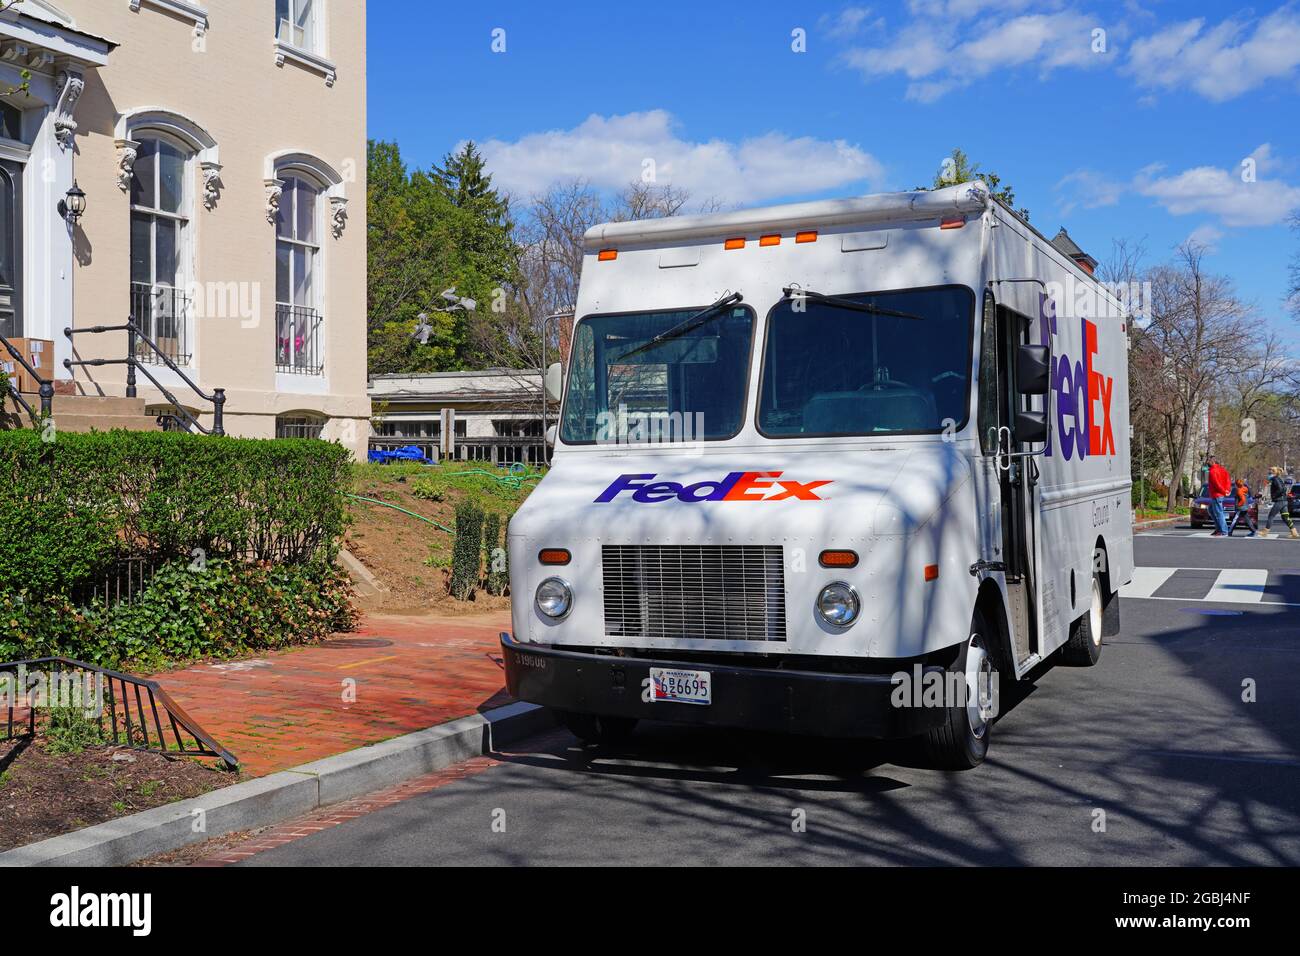 WASHINGTON, DC -2 APR 2021- View of a delivery truck from Federal Express (Fedex) parked on the street in Washington DC. Stock Photo